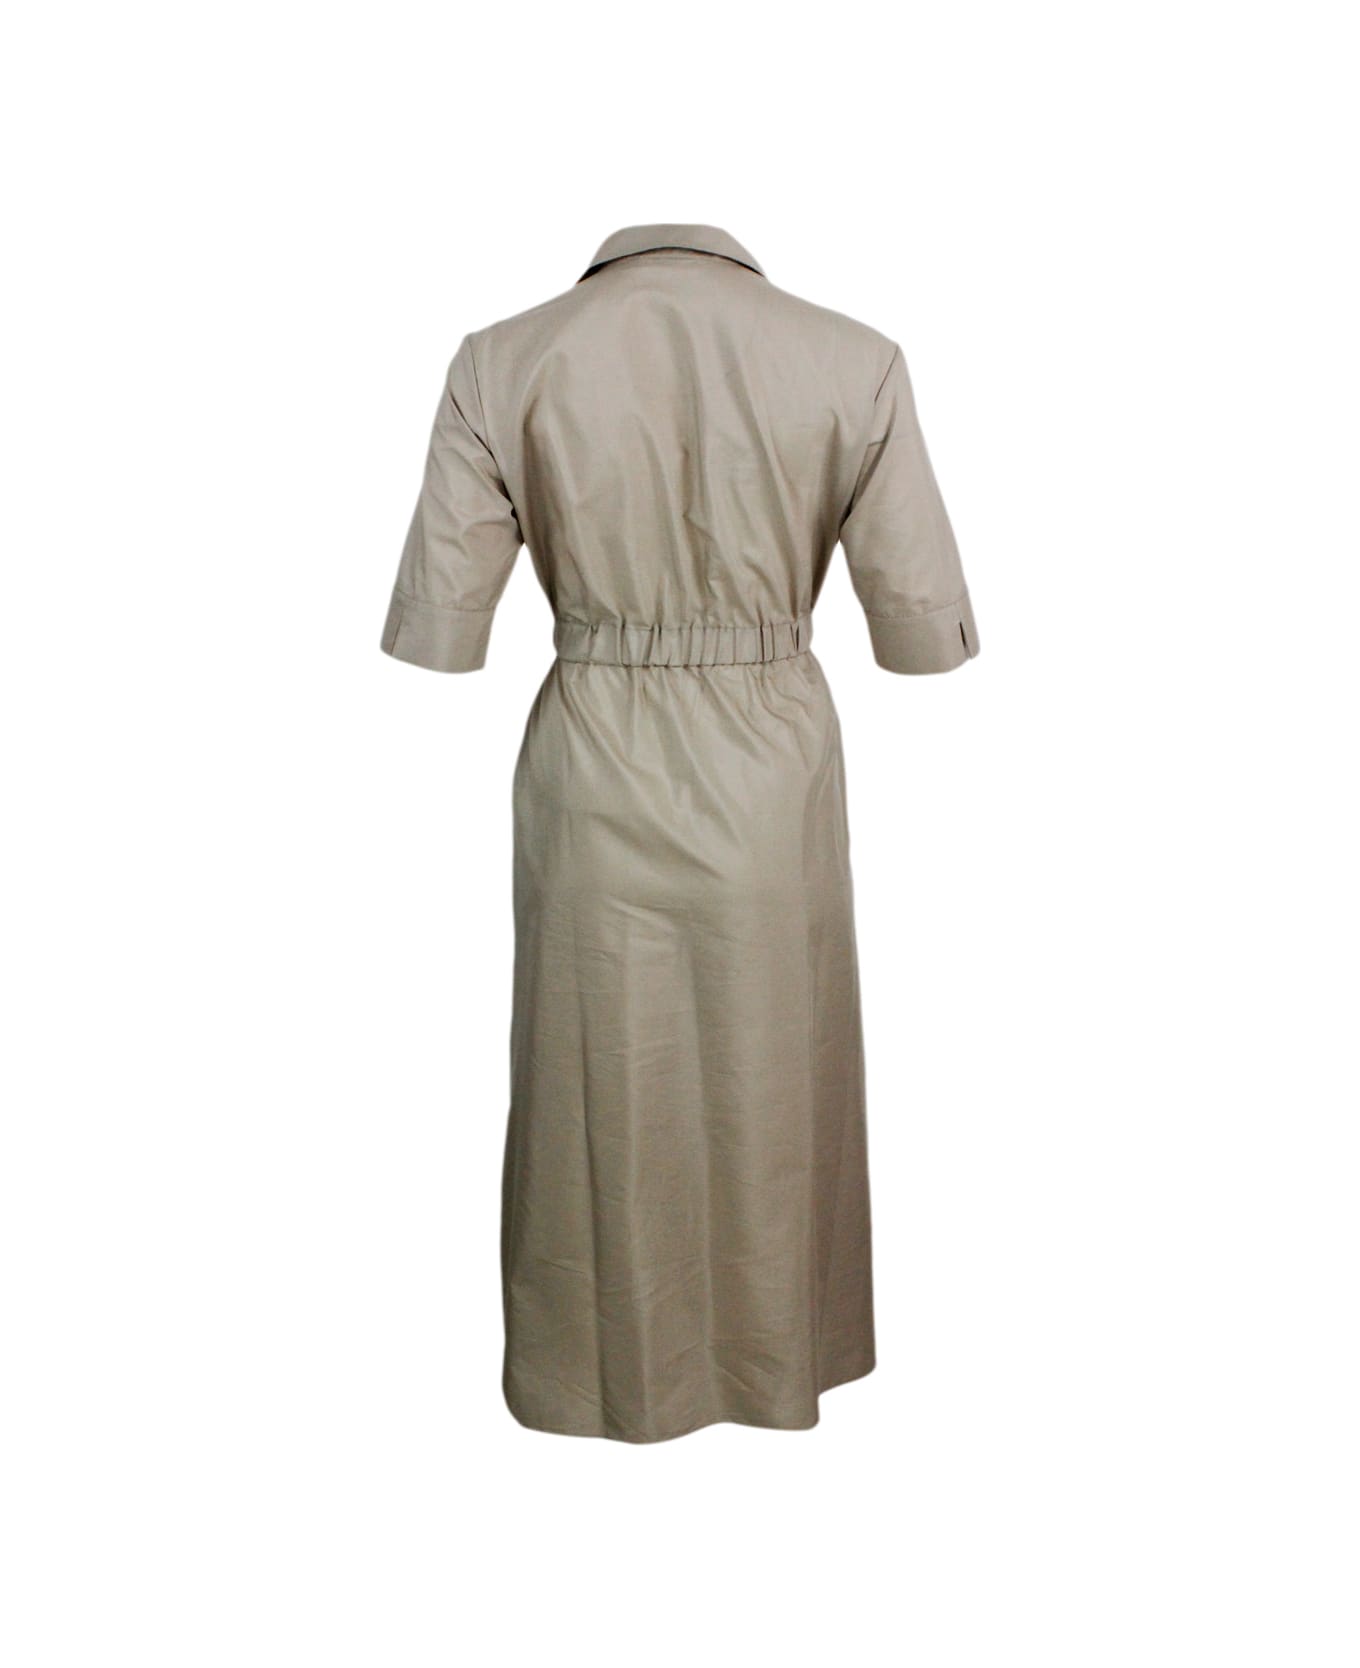 Barba Napoli Long Dress Made Of Cotton With Short Sleeves, With Elastic Waist And Button Closure. Welt Pockets - Beige